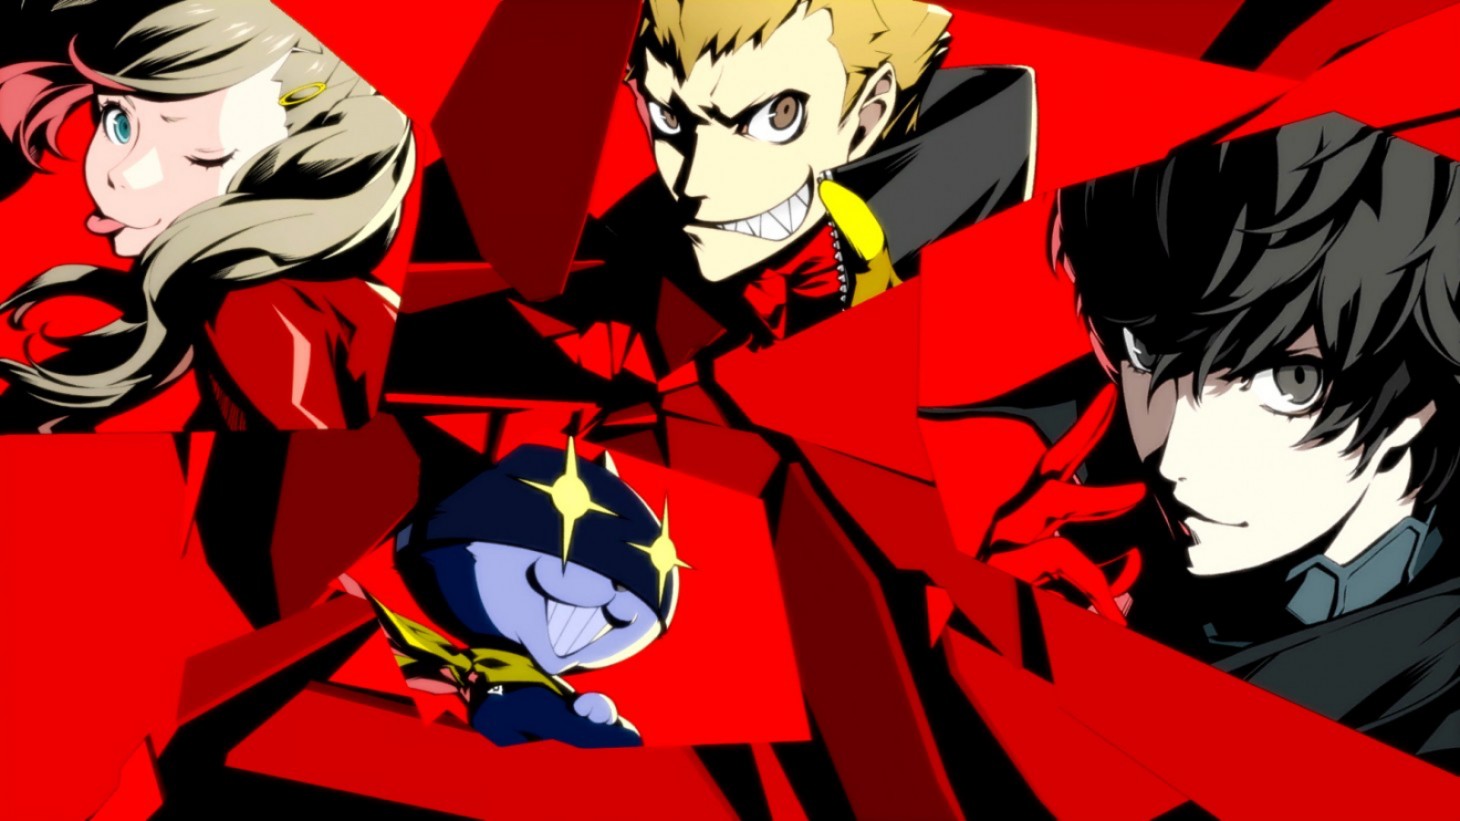 Persona 5 Royal Xbox Series X gameplay confirms 60fps upgrade